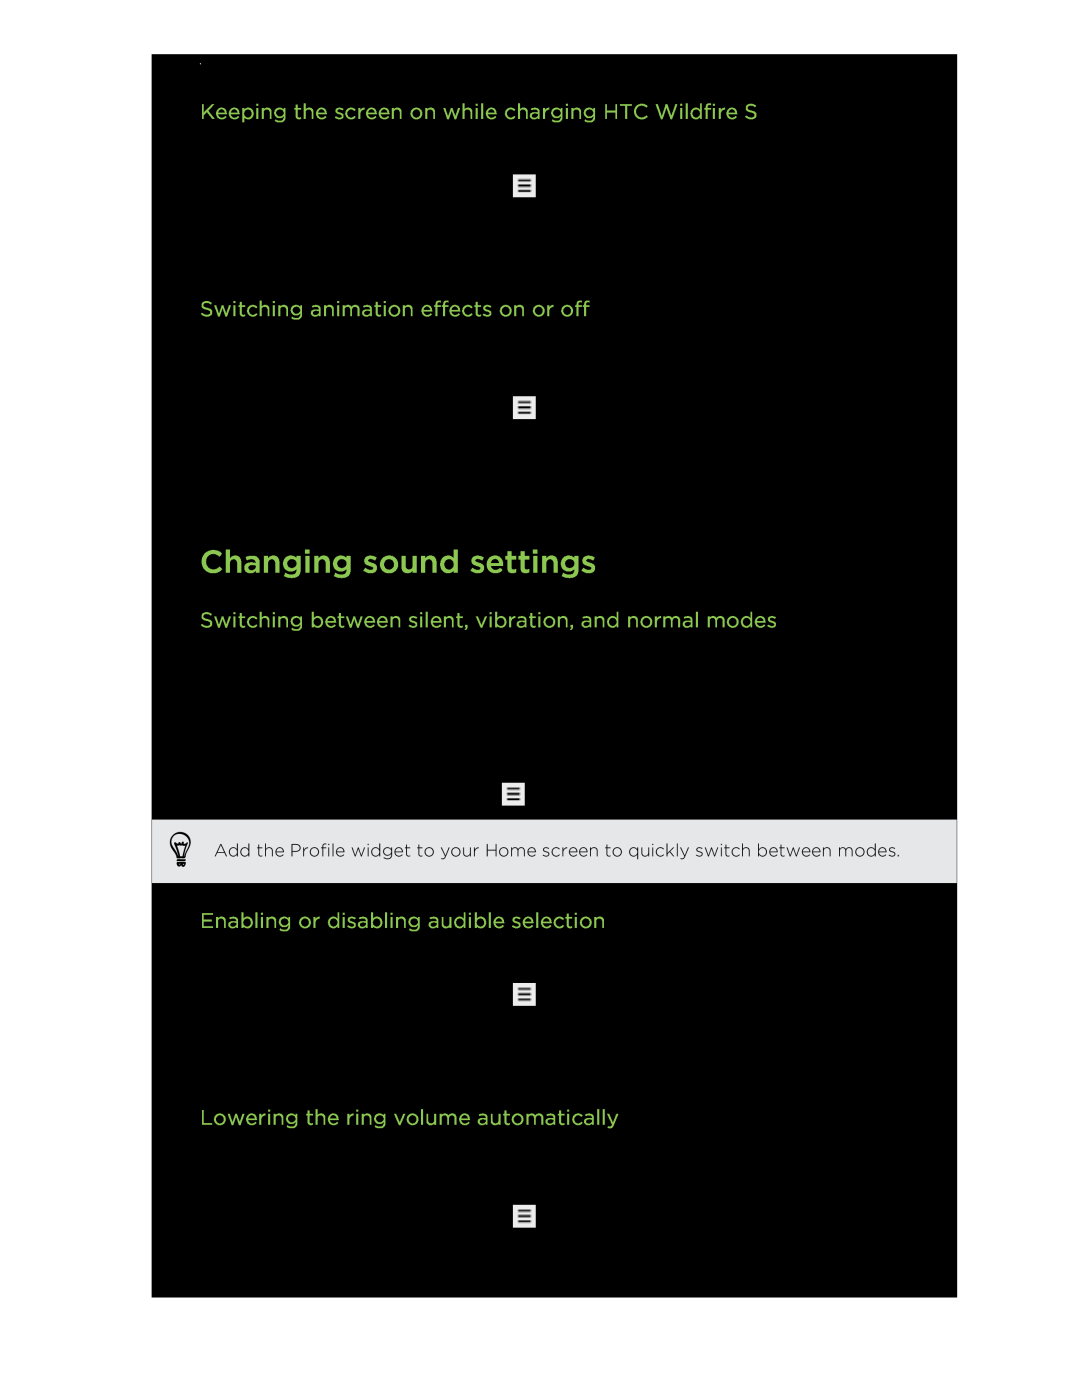 HTC Changing sound settings, Keeping the screen on while charging HTC Wildfire S, Switching animation effects on or off 